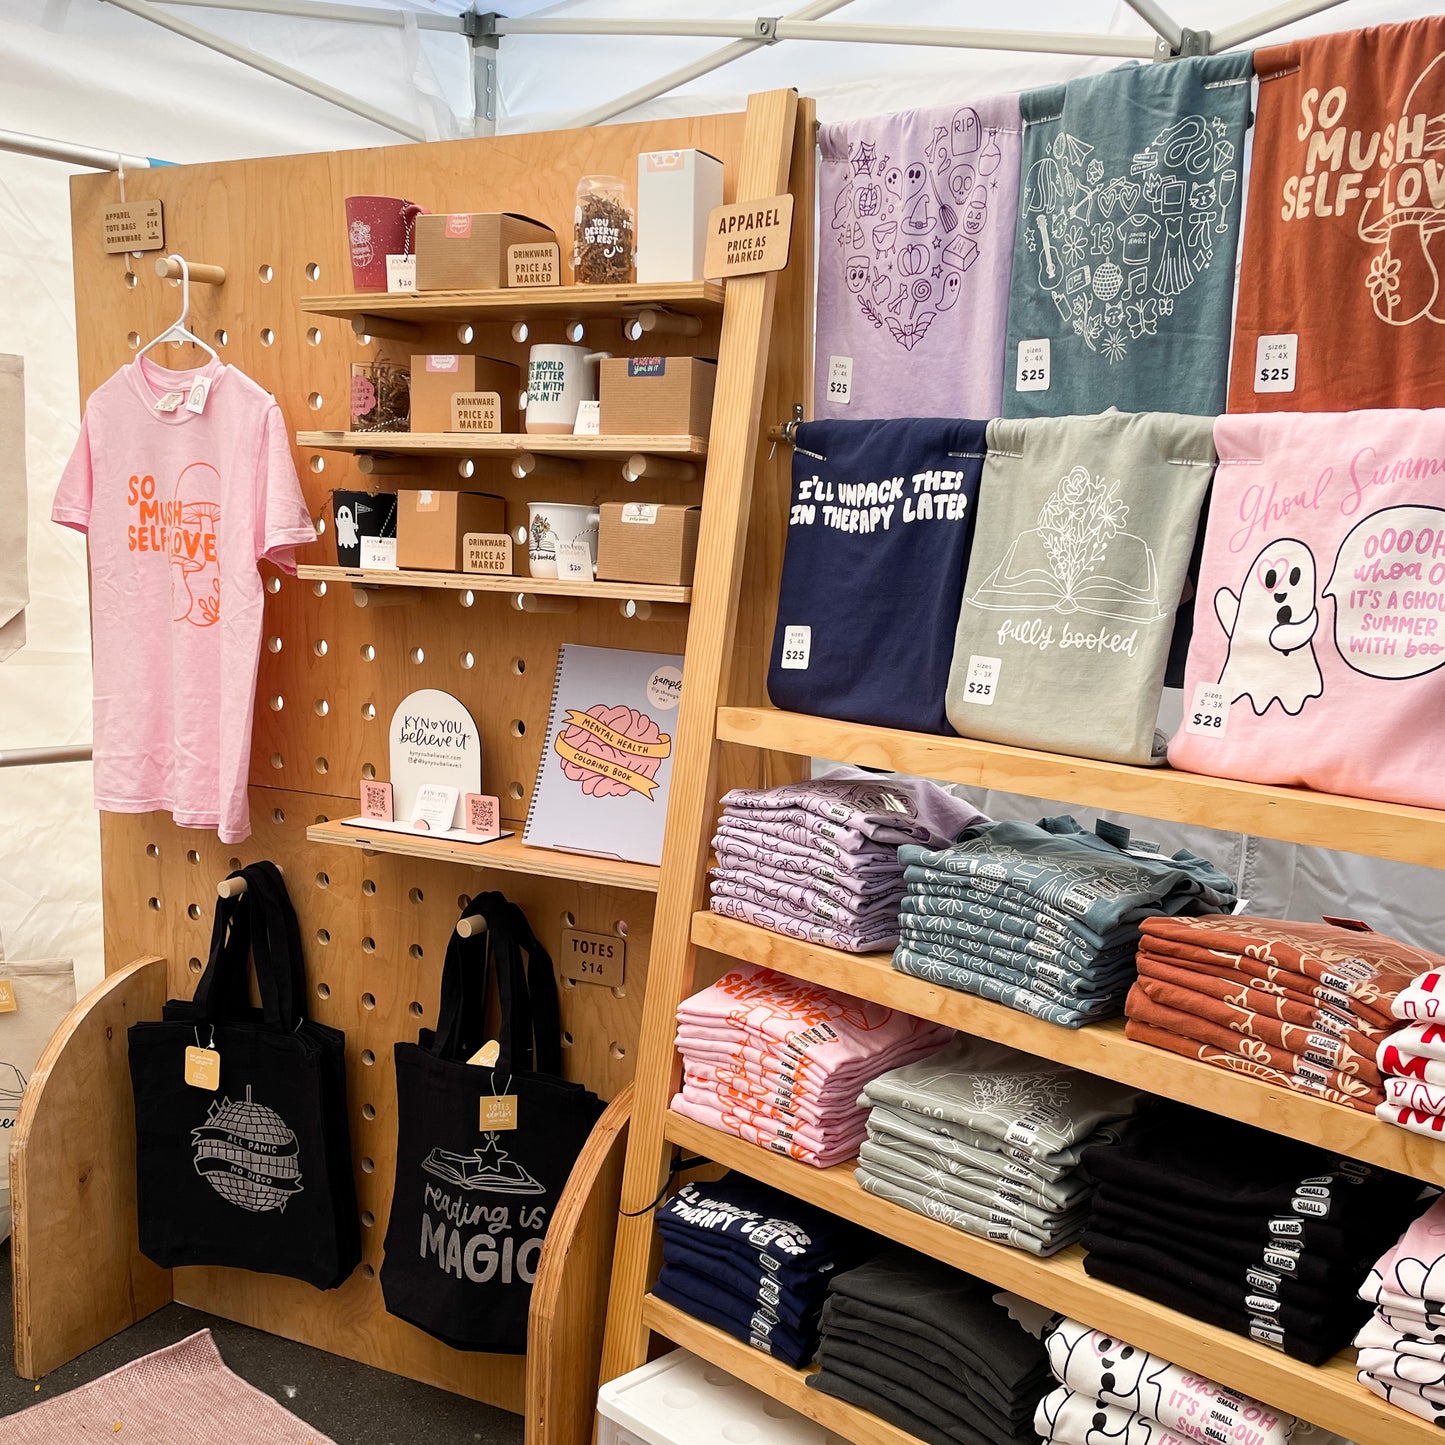 5 Items Your Market Booth Set-Up Needs